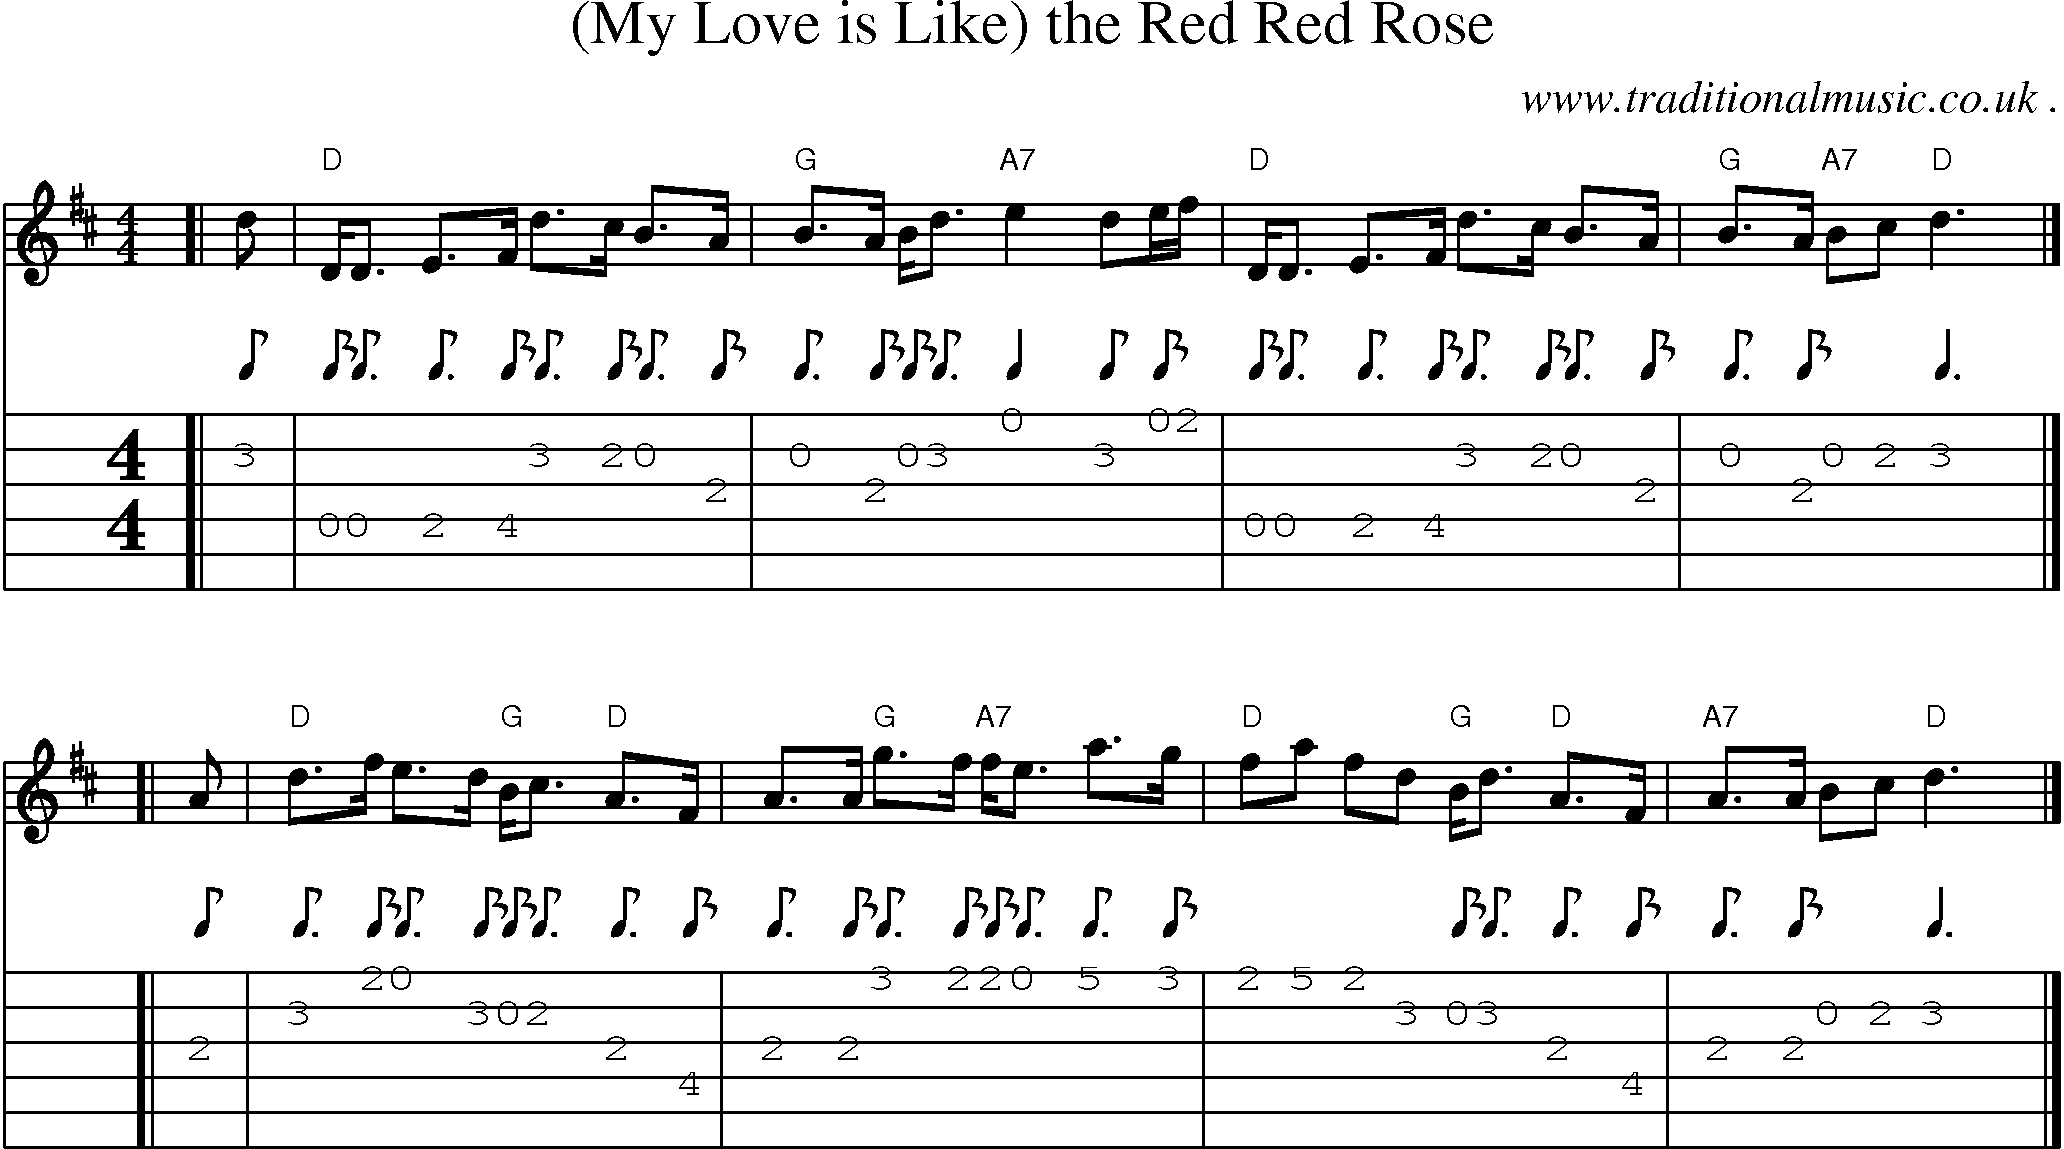 Sheet-music  score, Chords and Guitar Tabs for My Love Is Like The Red Red Rose